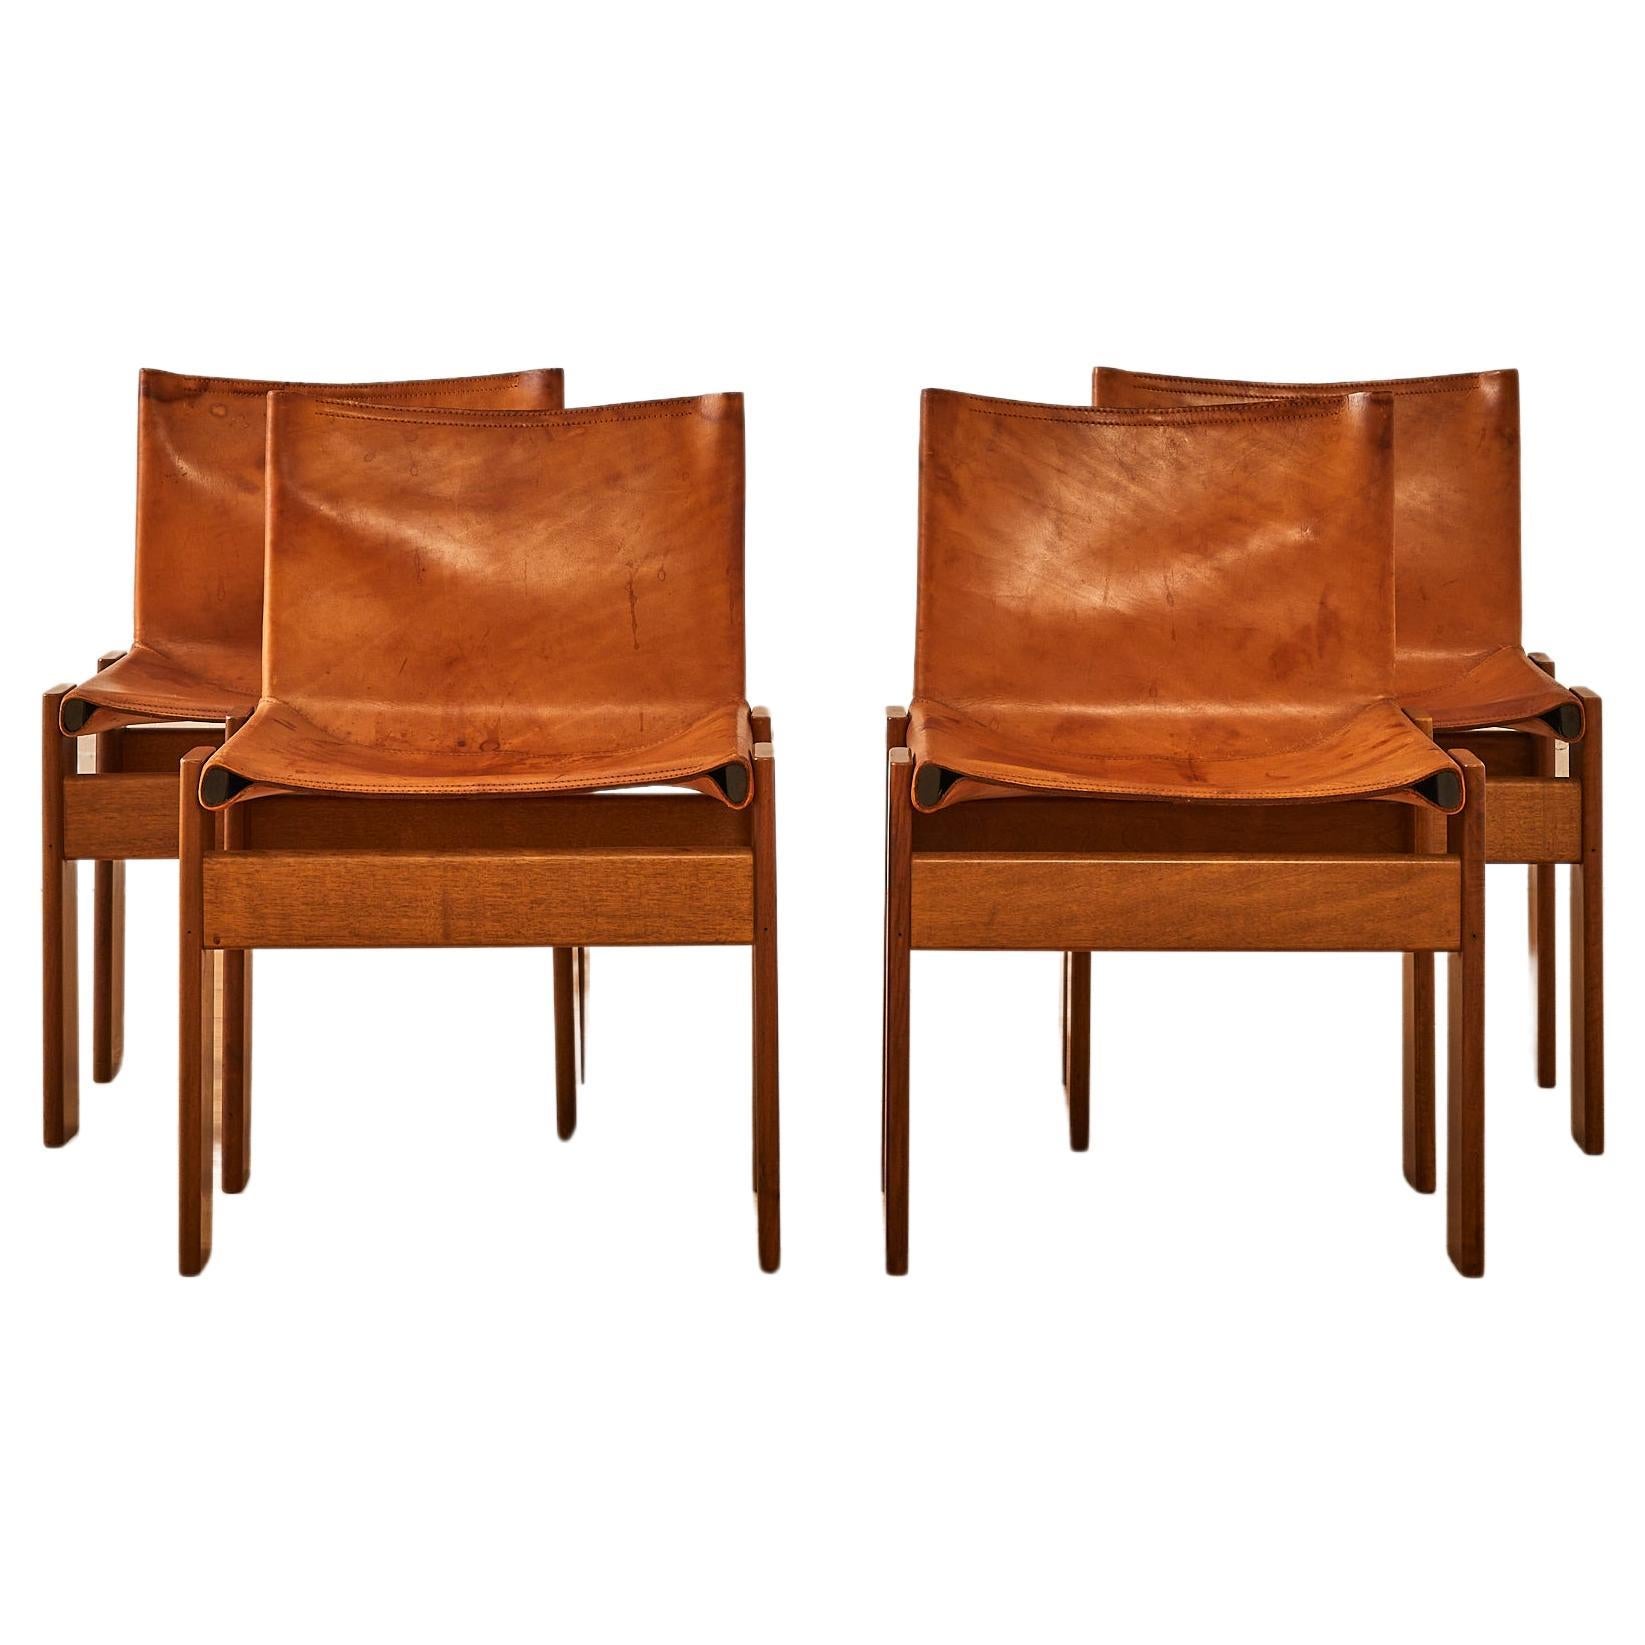 Set of 4 "Monk" Chairs by Afra & Tobia Scarpa